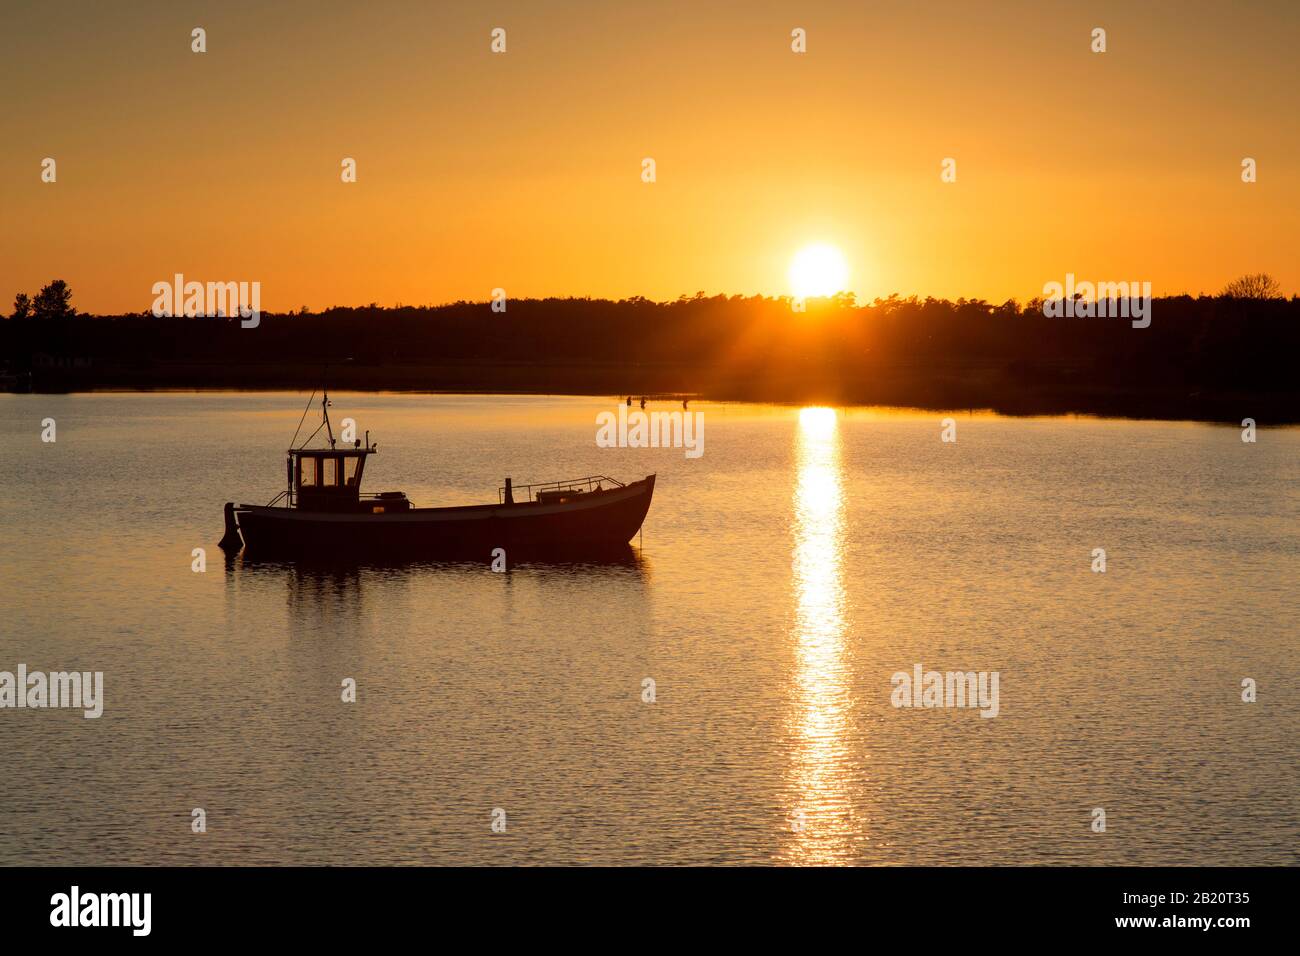 Fishing boat silhouetted against sunset, island of Ummanz, municipality in the Vorpommern-Rügen district in Mecklenburg-Vorpommern, Germany Stock Photo